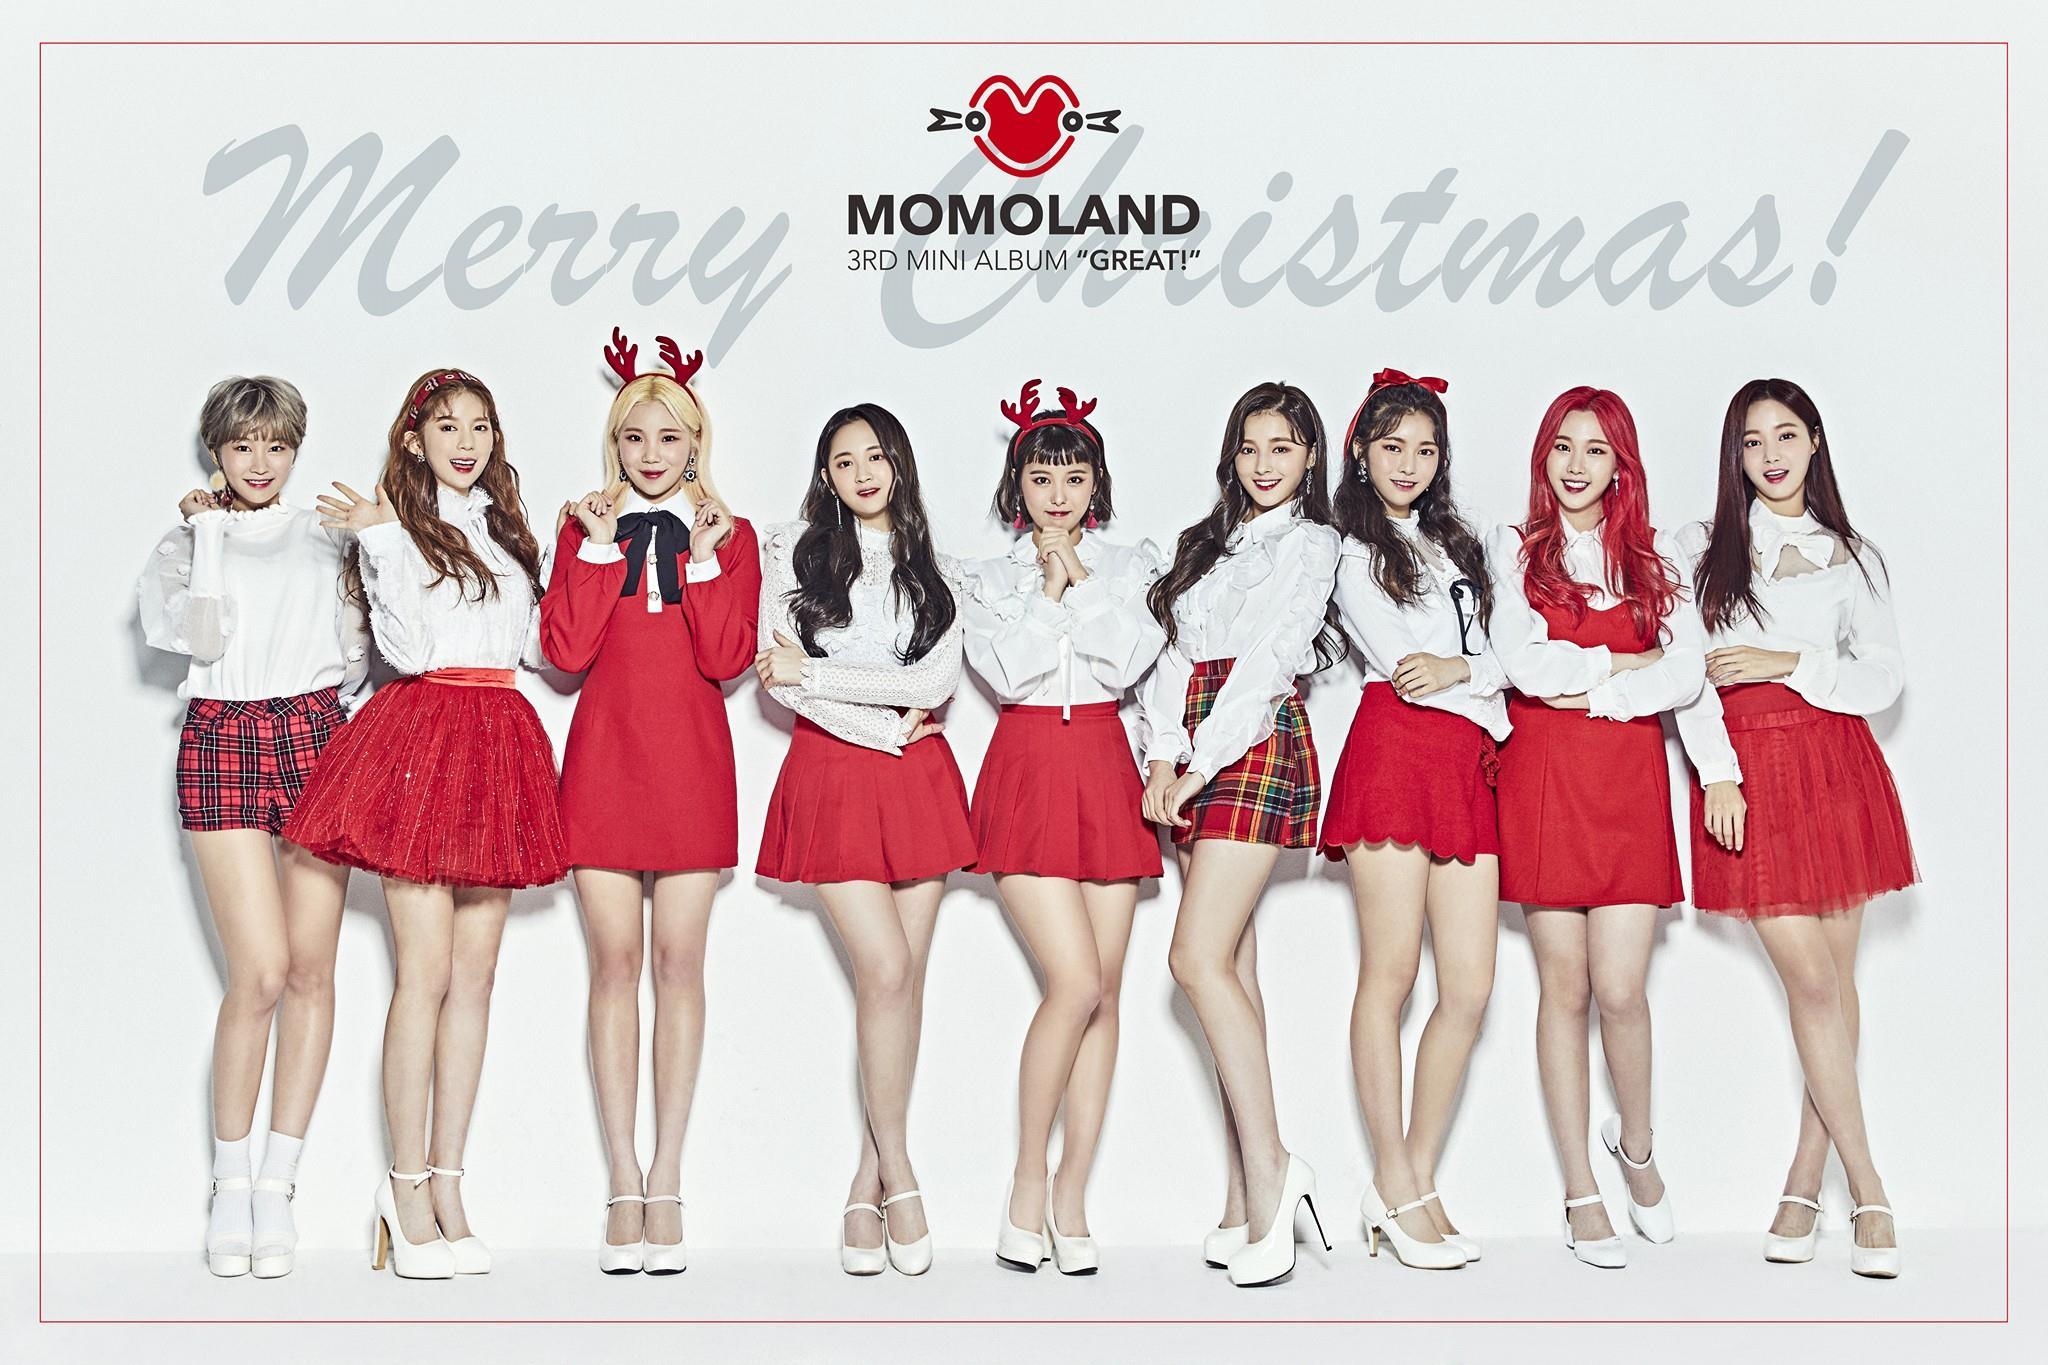 MOMOLAND Members Profile: Famous Producer Duble Kick's First Girl